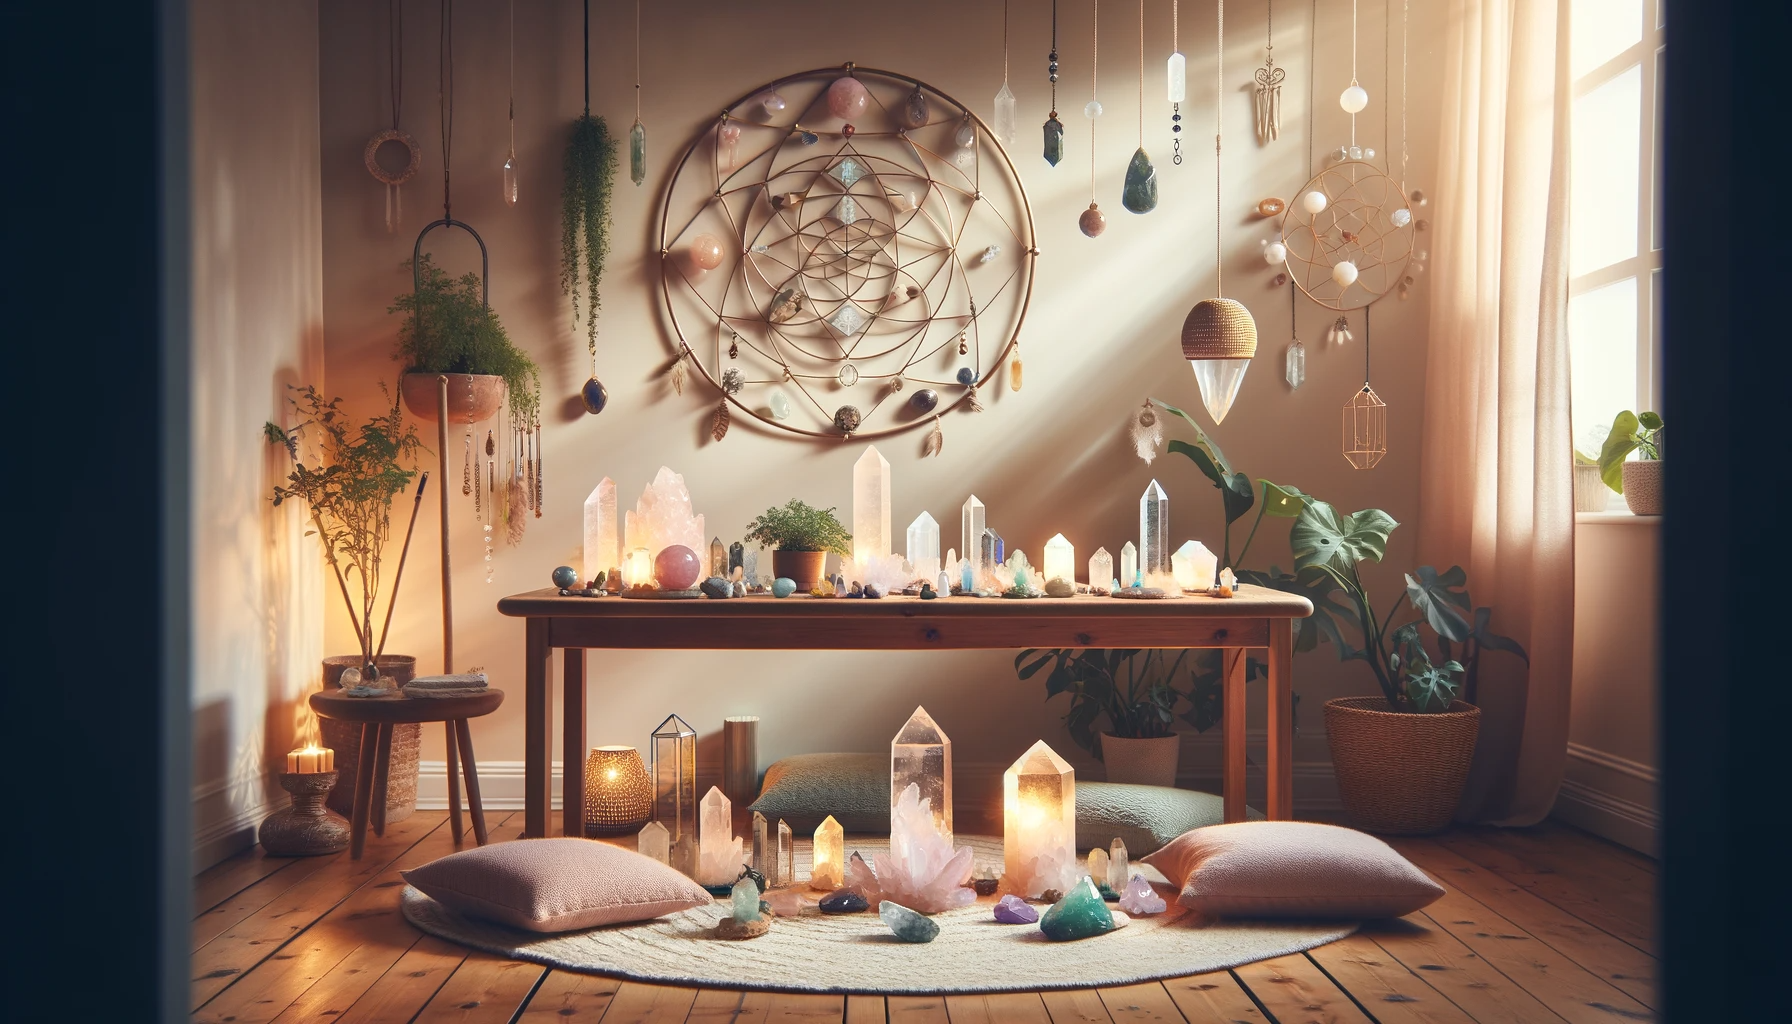 ·E 2023 12 05 13.50.59   A serene and peaceful home sanctuary featuring various crystals, soft lighting, and natural elements. The room is decorated with a crystal grid on a t.png